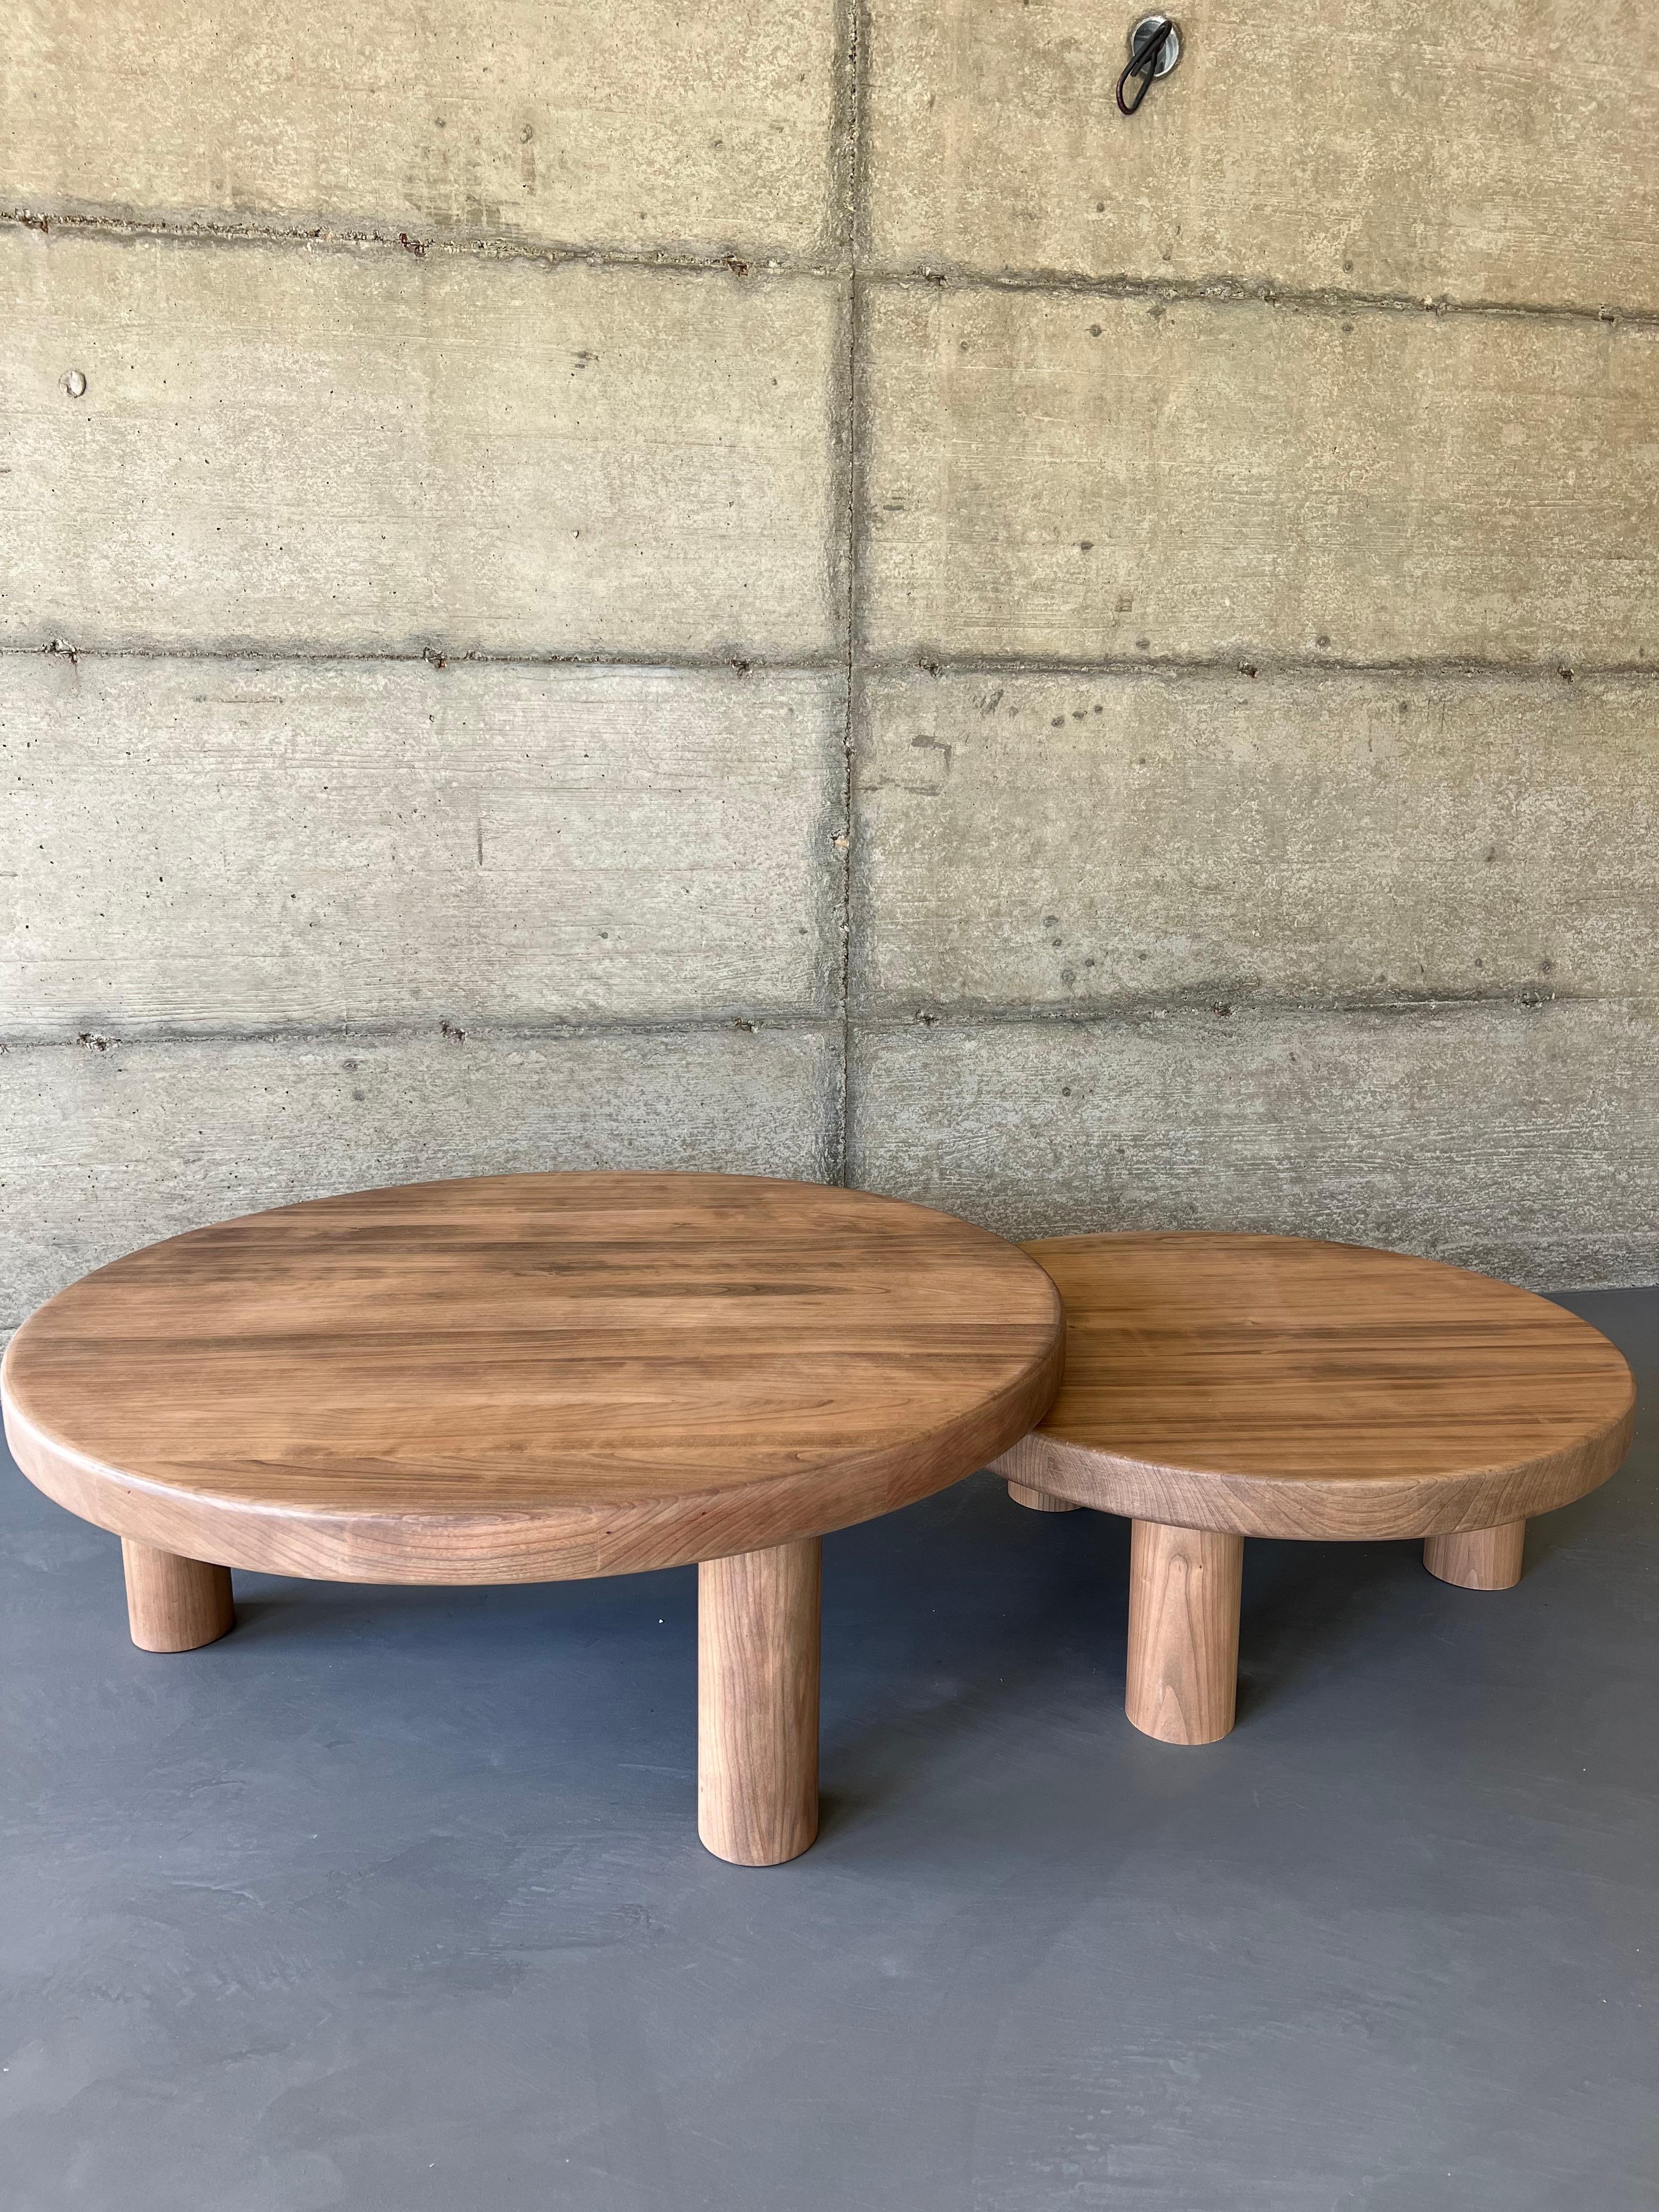 European Duo of Mid-Century Style Coffee Tables in Solid Cherry Wood